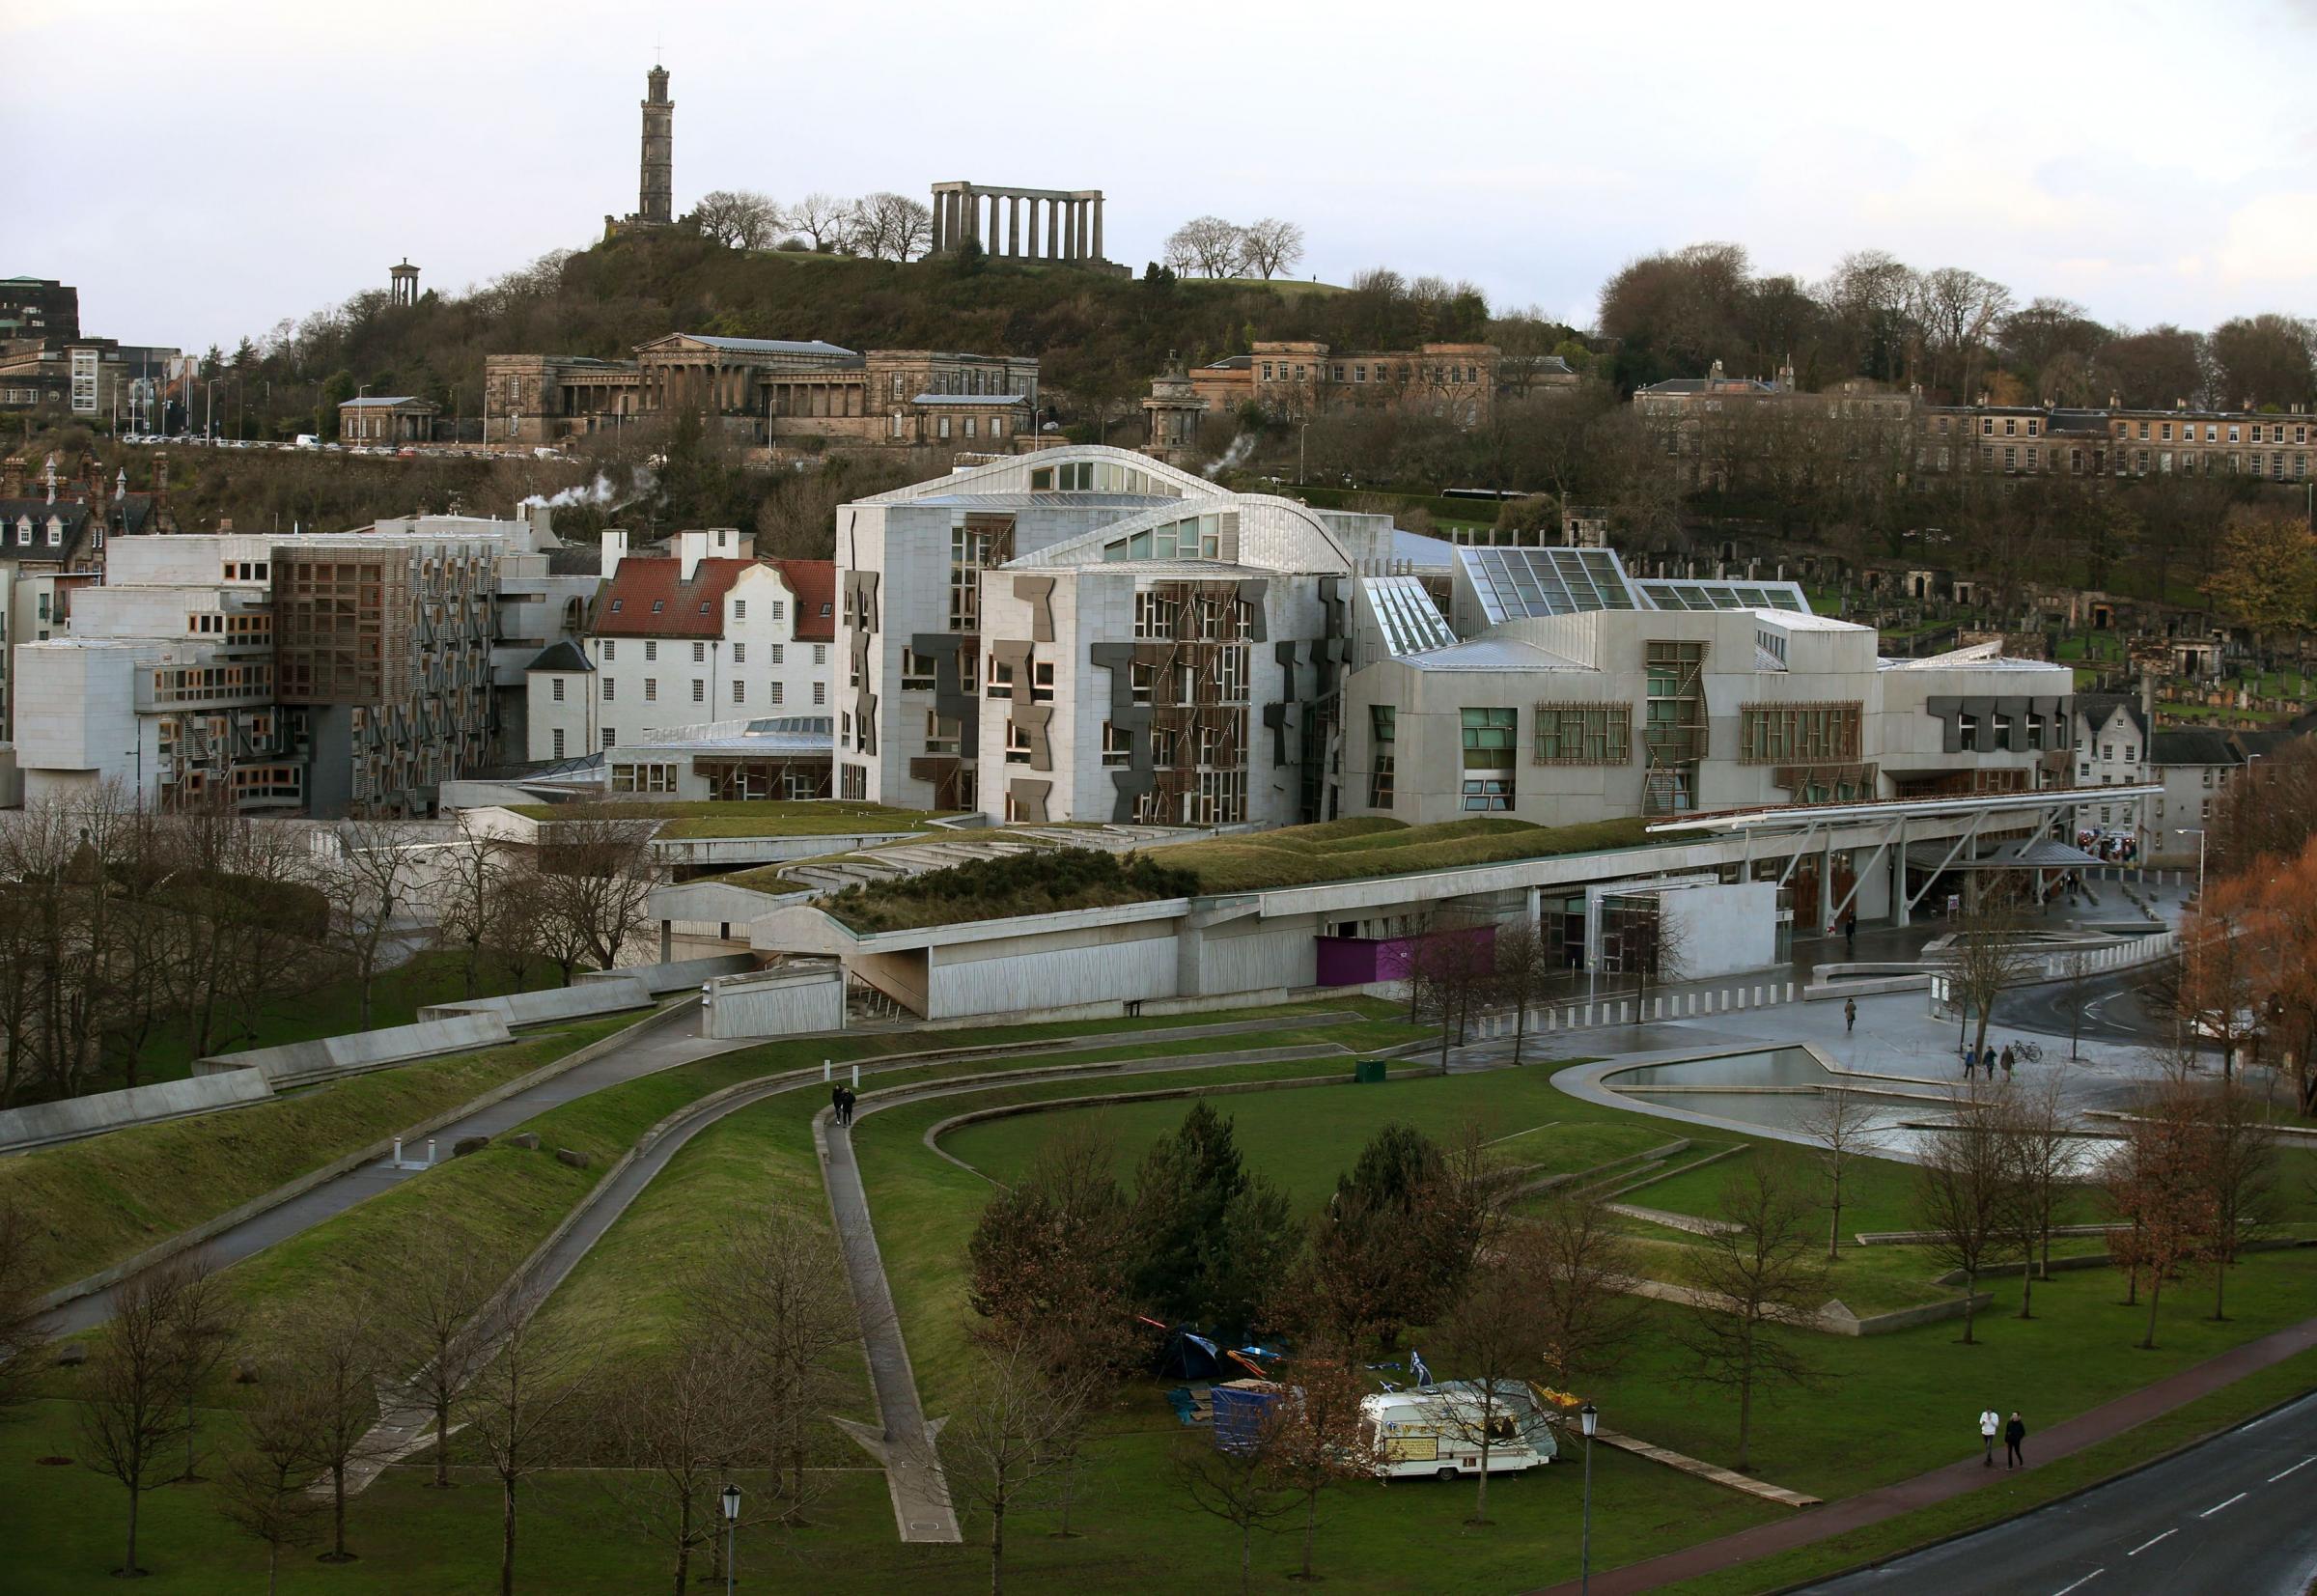 Independence campaigners lose appeal against Holyrood eviction